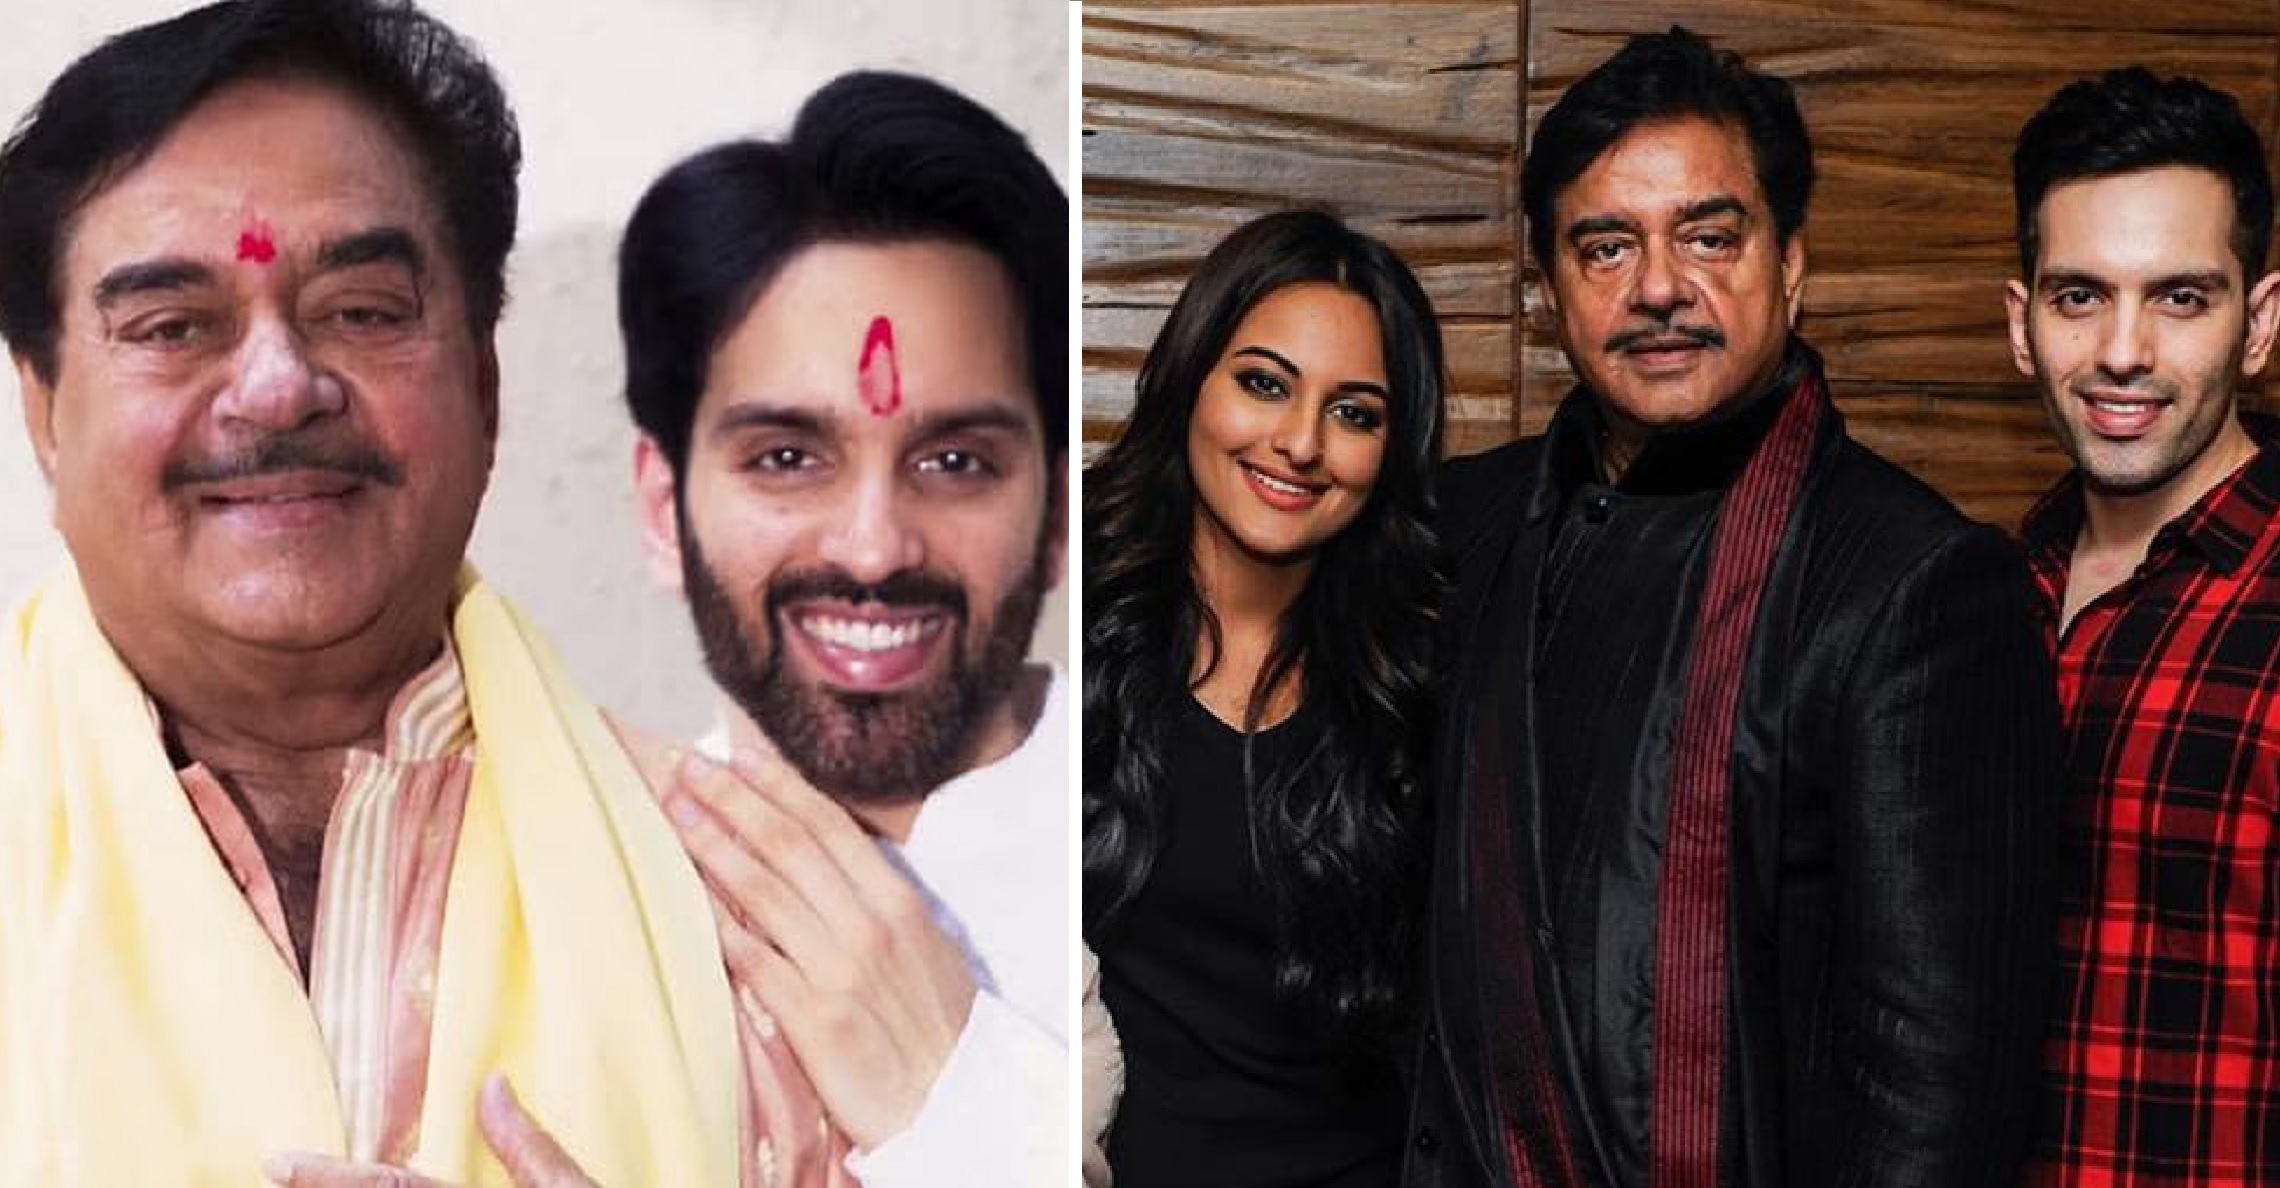 Shatrughan Sinha Says His Kids Don’t Do Drugs: ‘Their upbringing is good’